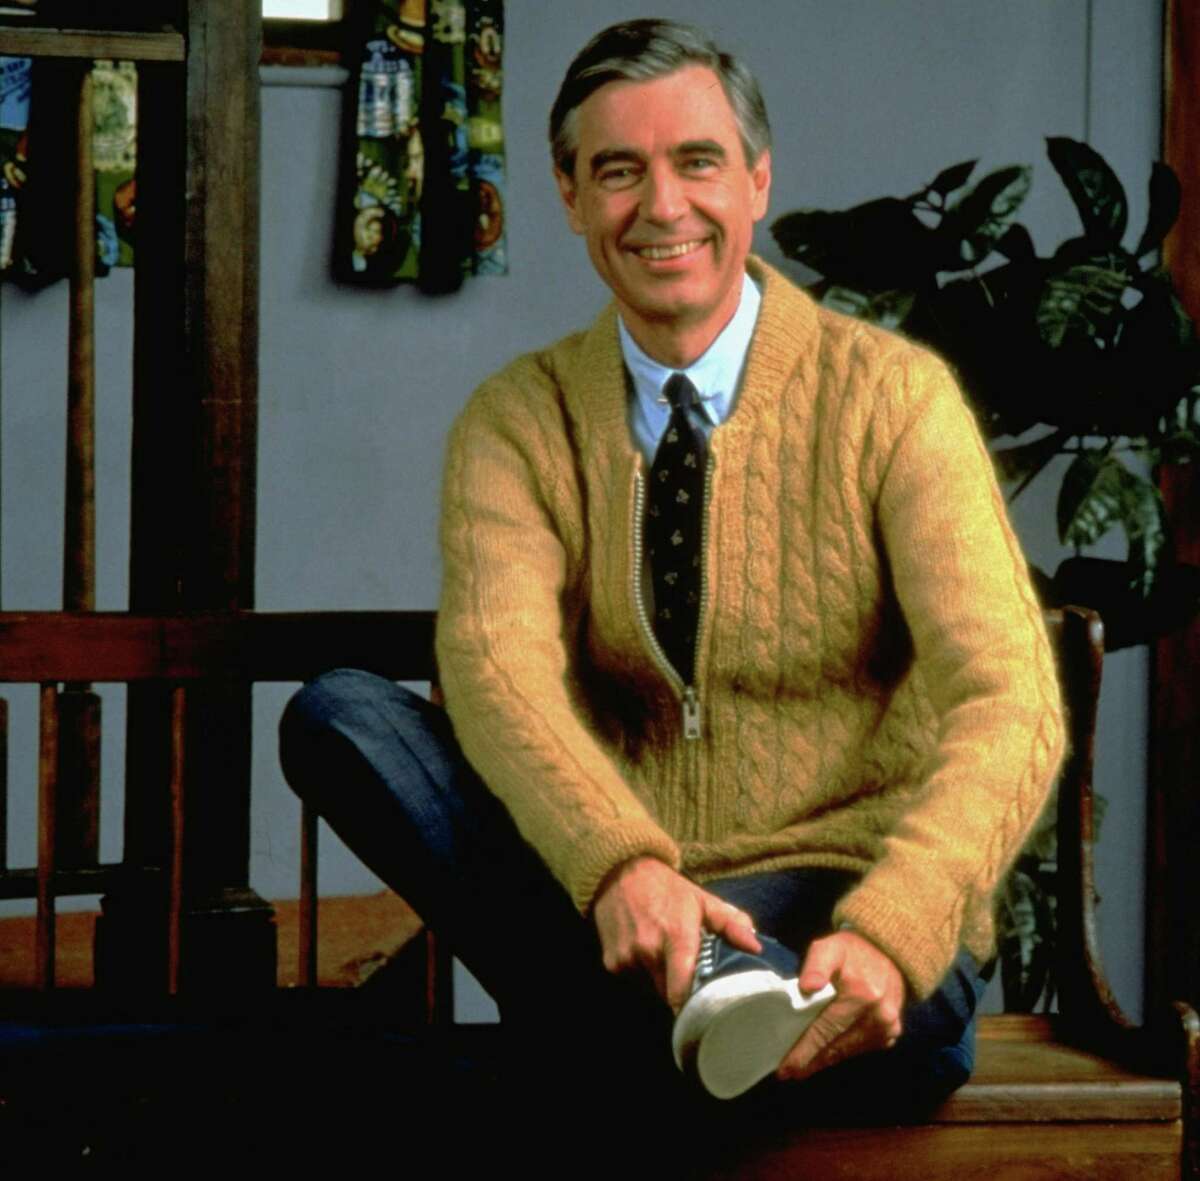 The temperate words of Fred Rogers, shown on the set of “Mister Rogers’ Neighborhood” in 1996, contrast with the man we’ve elected president. Trumpism lashes out at the outside world with fear and suspicion. Rogers embraced it.